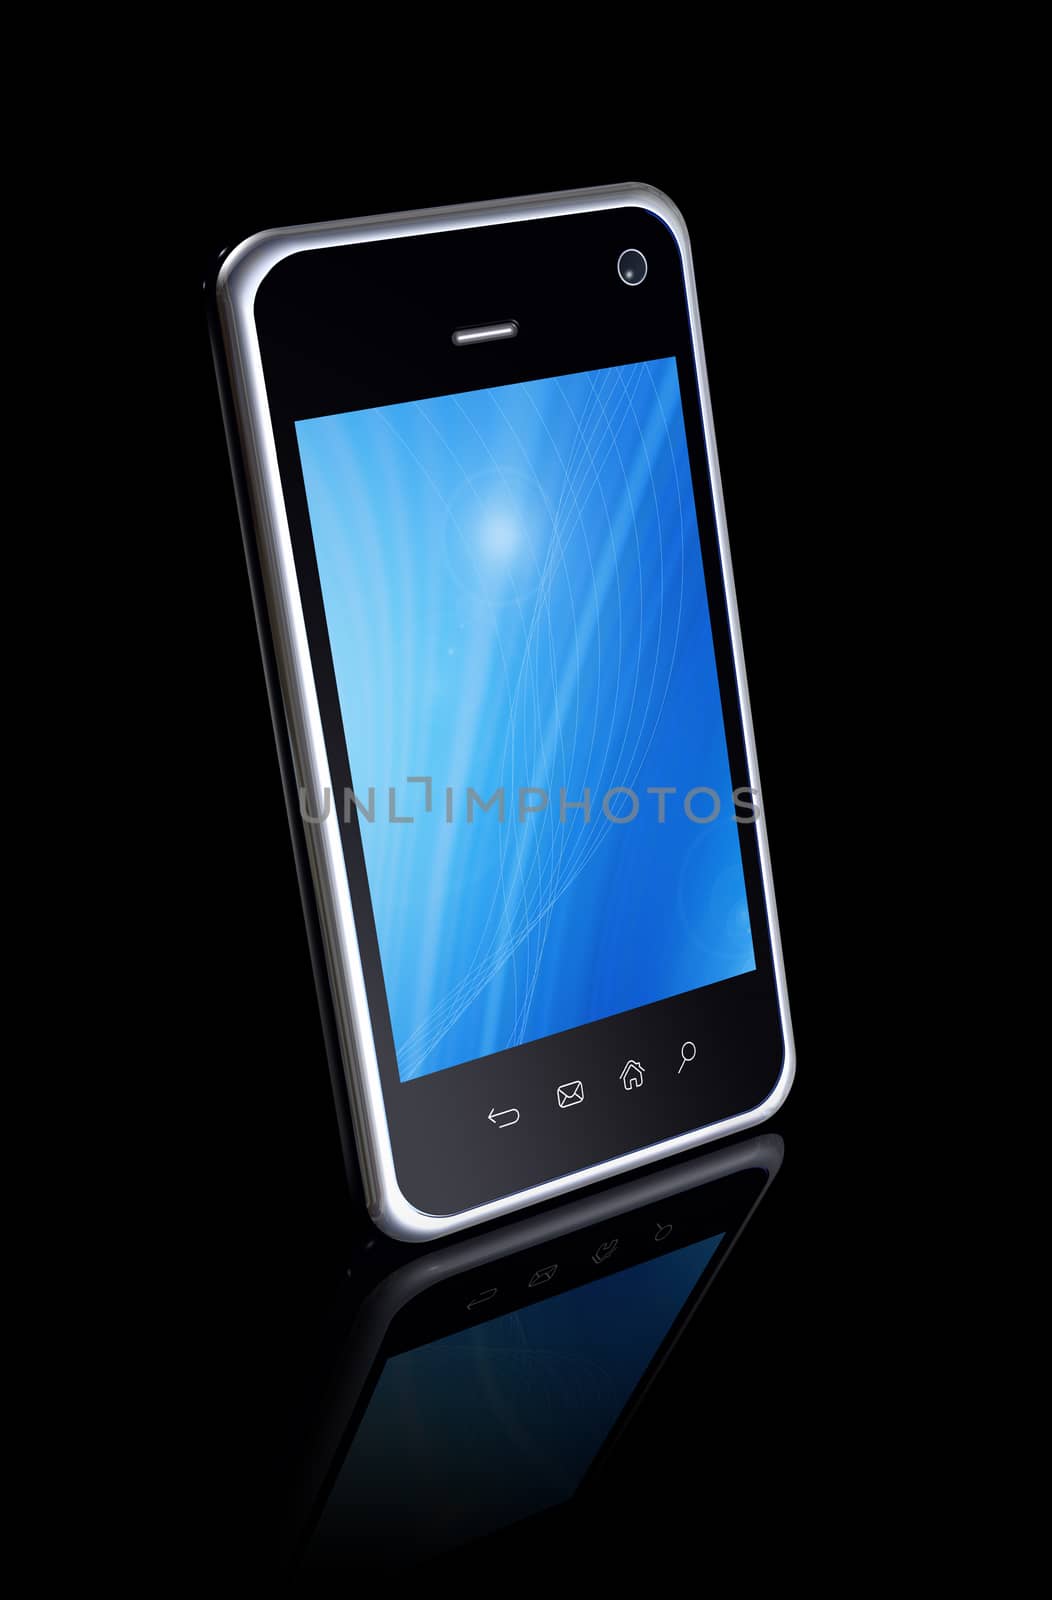 3D smartphone, mobile phone isolated on black with clipping path